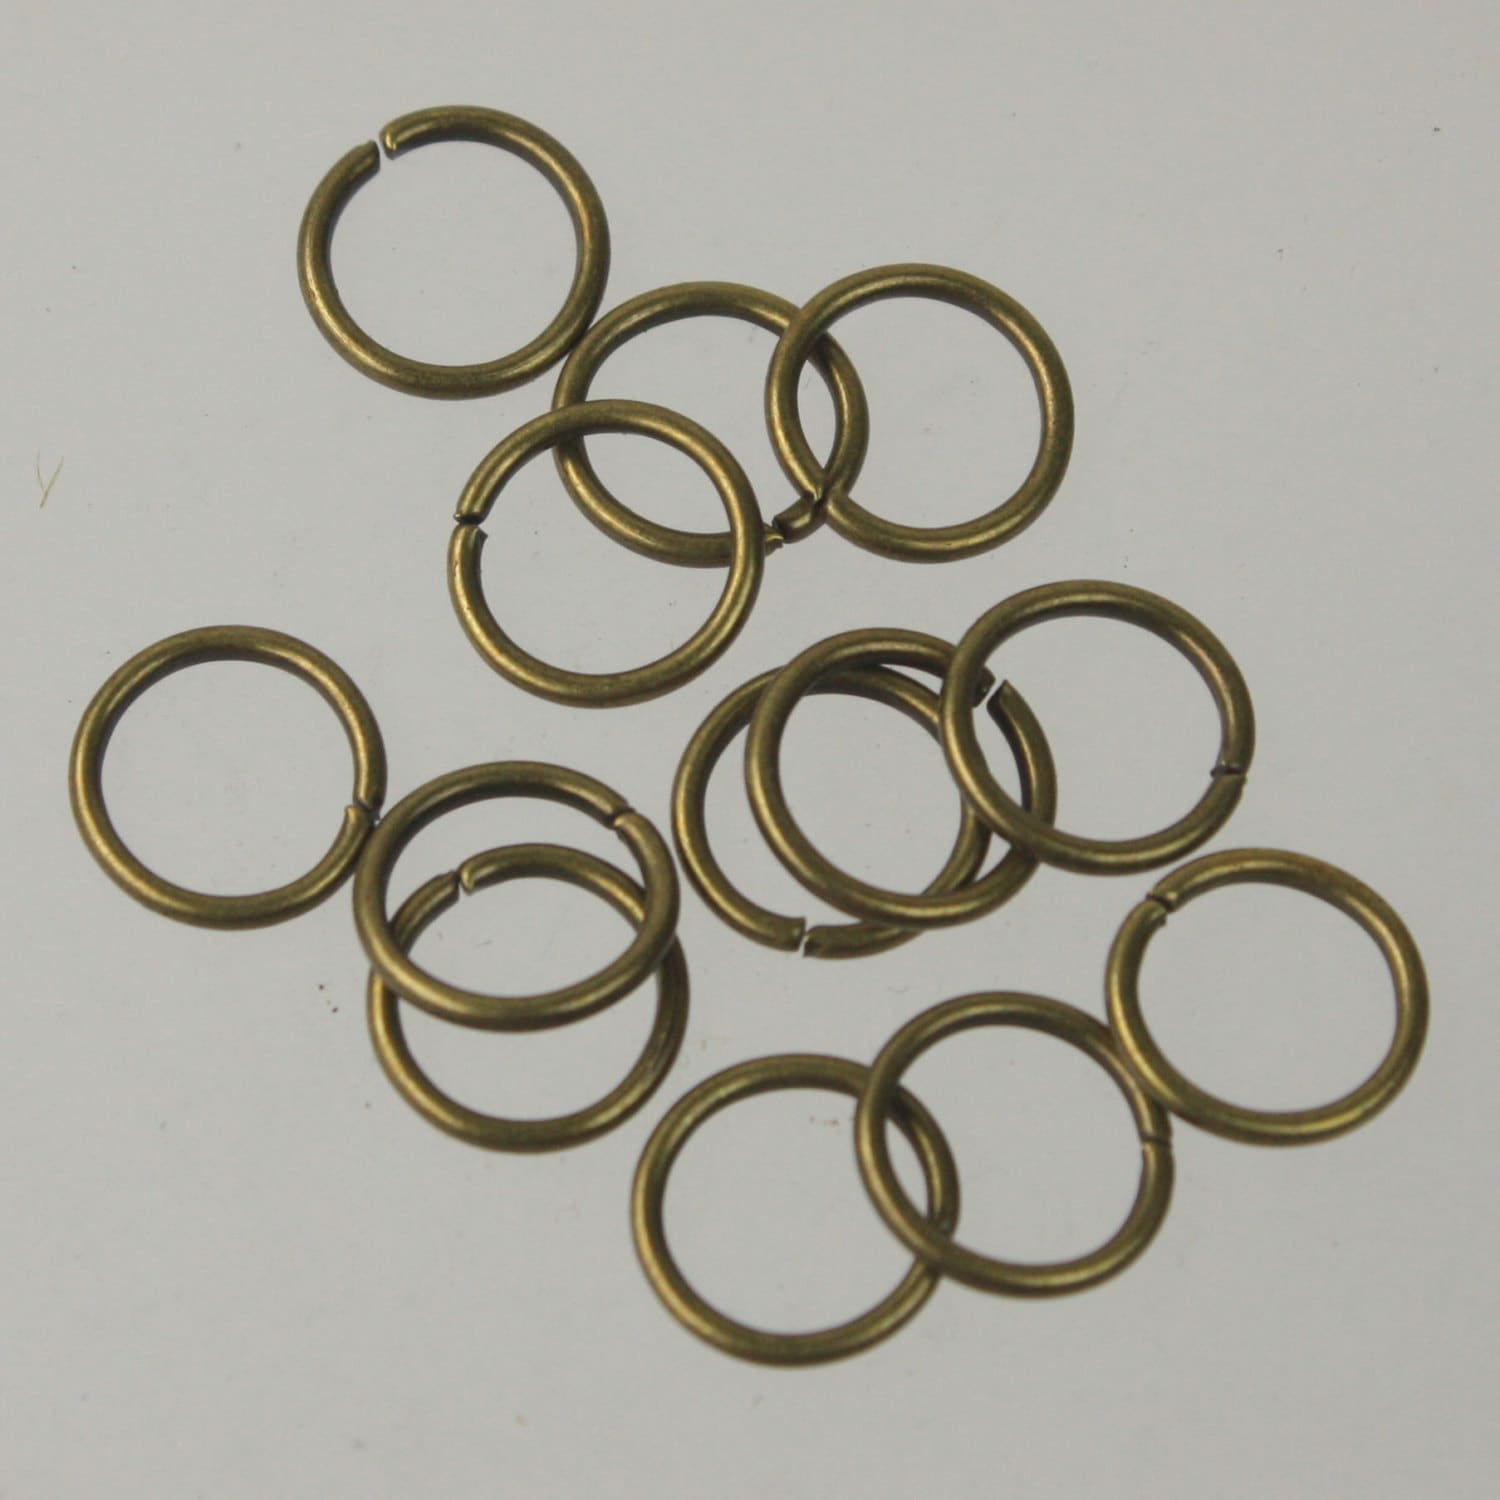 100pcs Adabele Authentic 925 Sterling Silver Open Jump Rings 12mm O Ring  Connector (Strong Wire 1mm/18 Gauge) for Jewelry Craft Making SS79-12